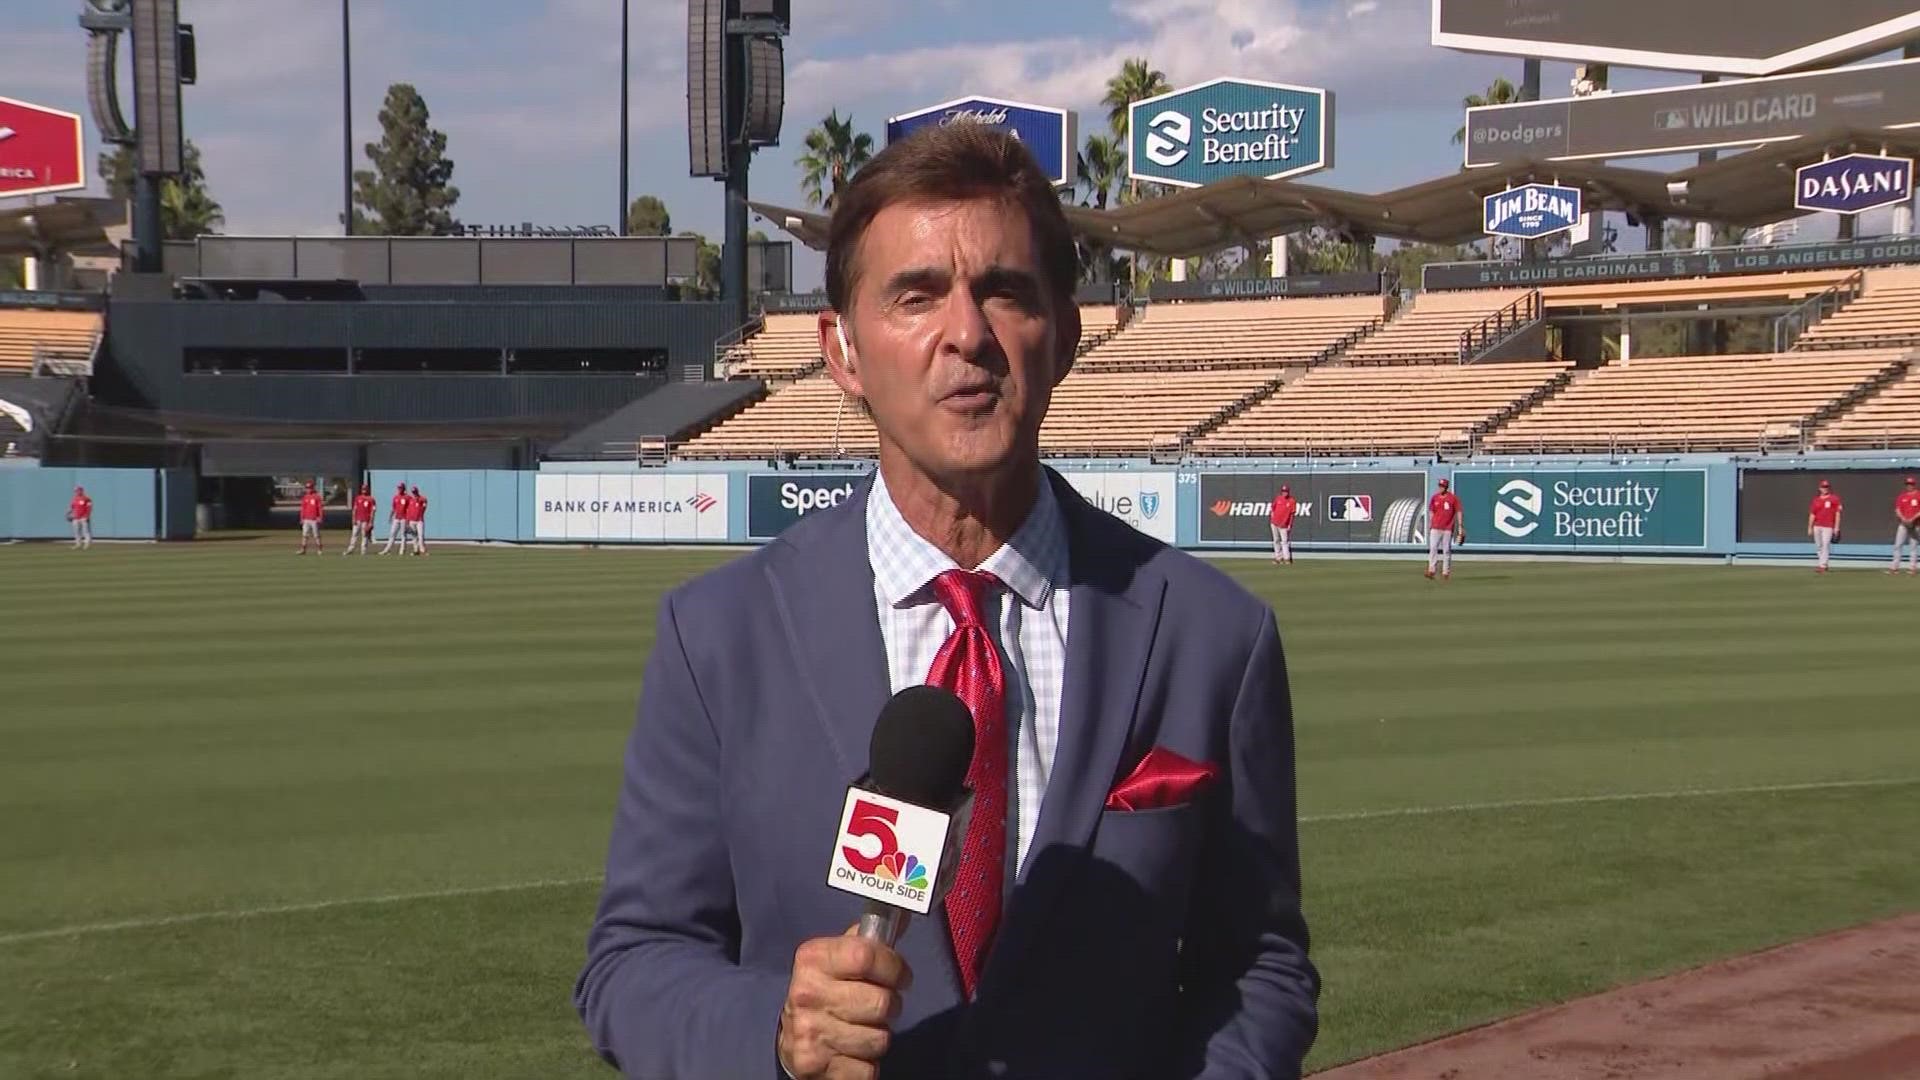 Sports director Frank Cusumano is in Los Angeles ahead of the National League Wild Card Game. Here's his latest report on the Cardinals.